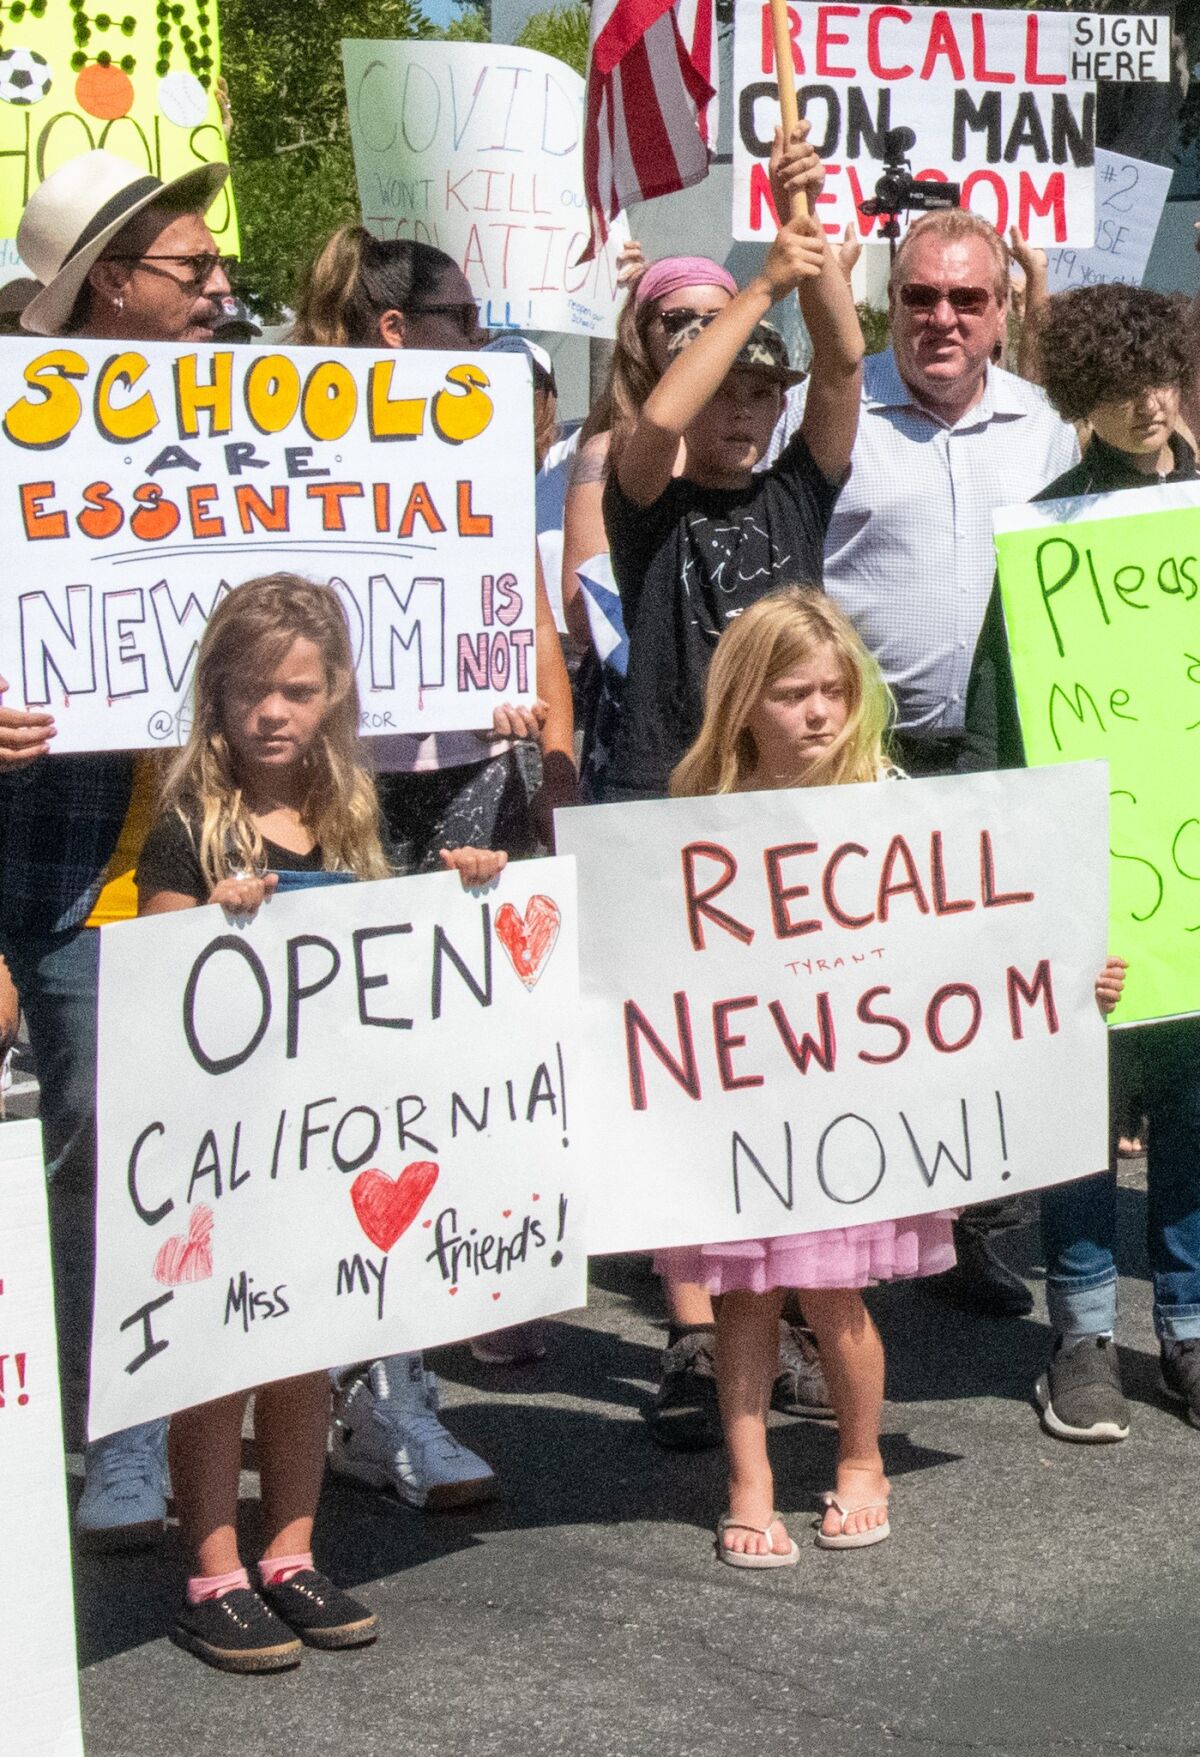 Children hold signs reading "Open California: I Miss my friends" and calling for the recall of Gov. Gavin Newsom.